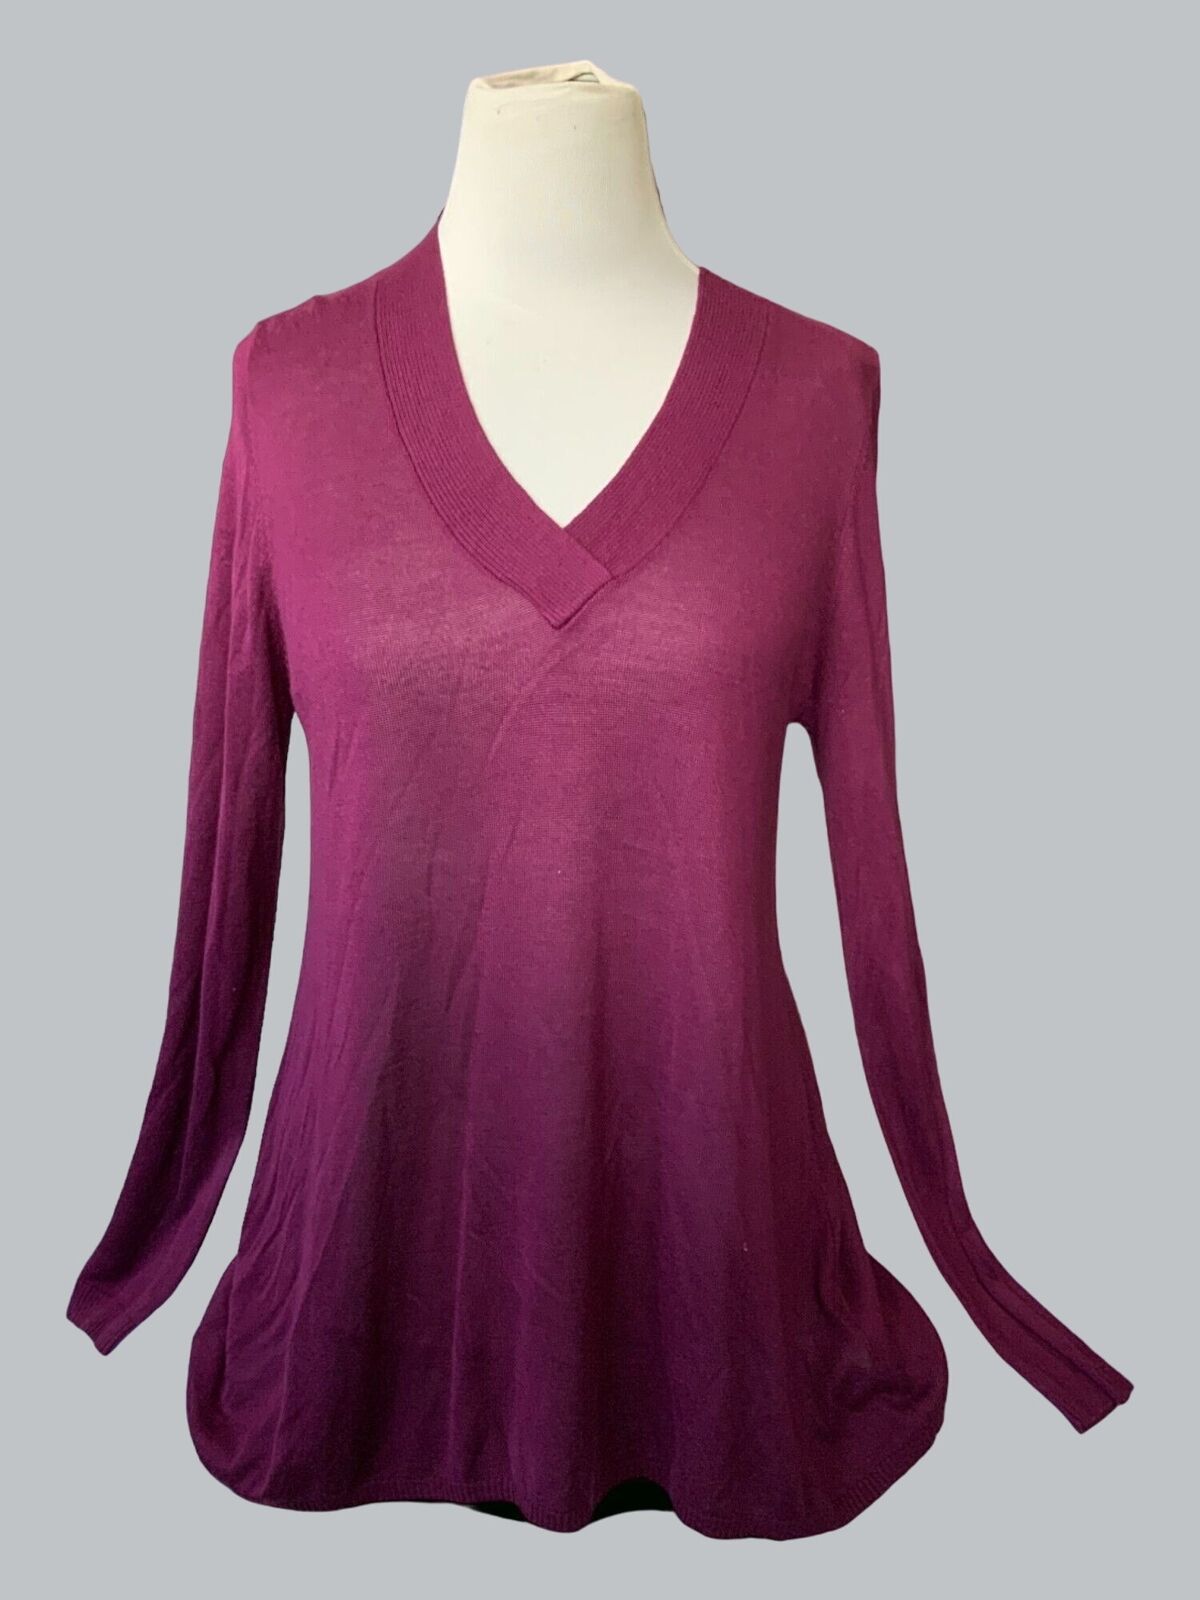 Primary image for Coldwater Creek solid purple long sleeve vneck lightweight ladies sweater Large